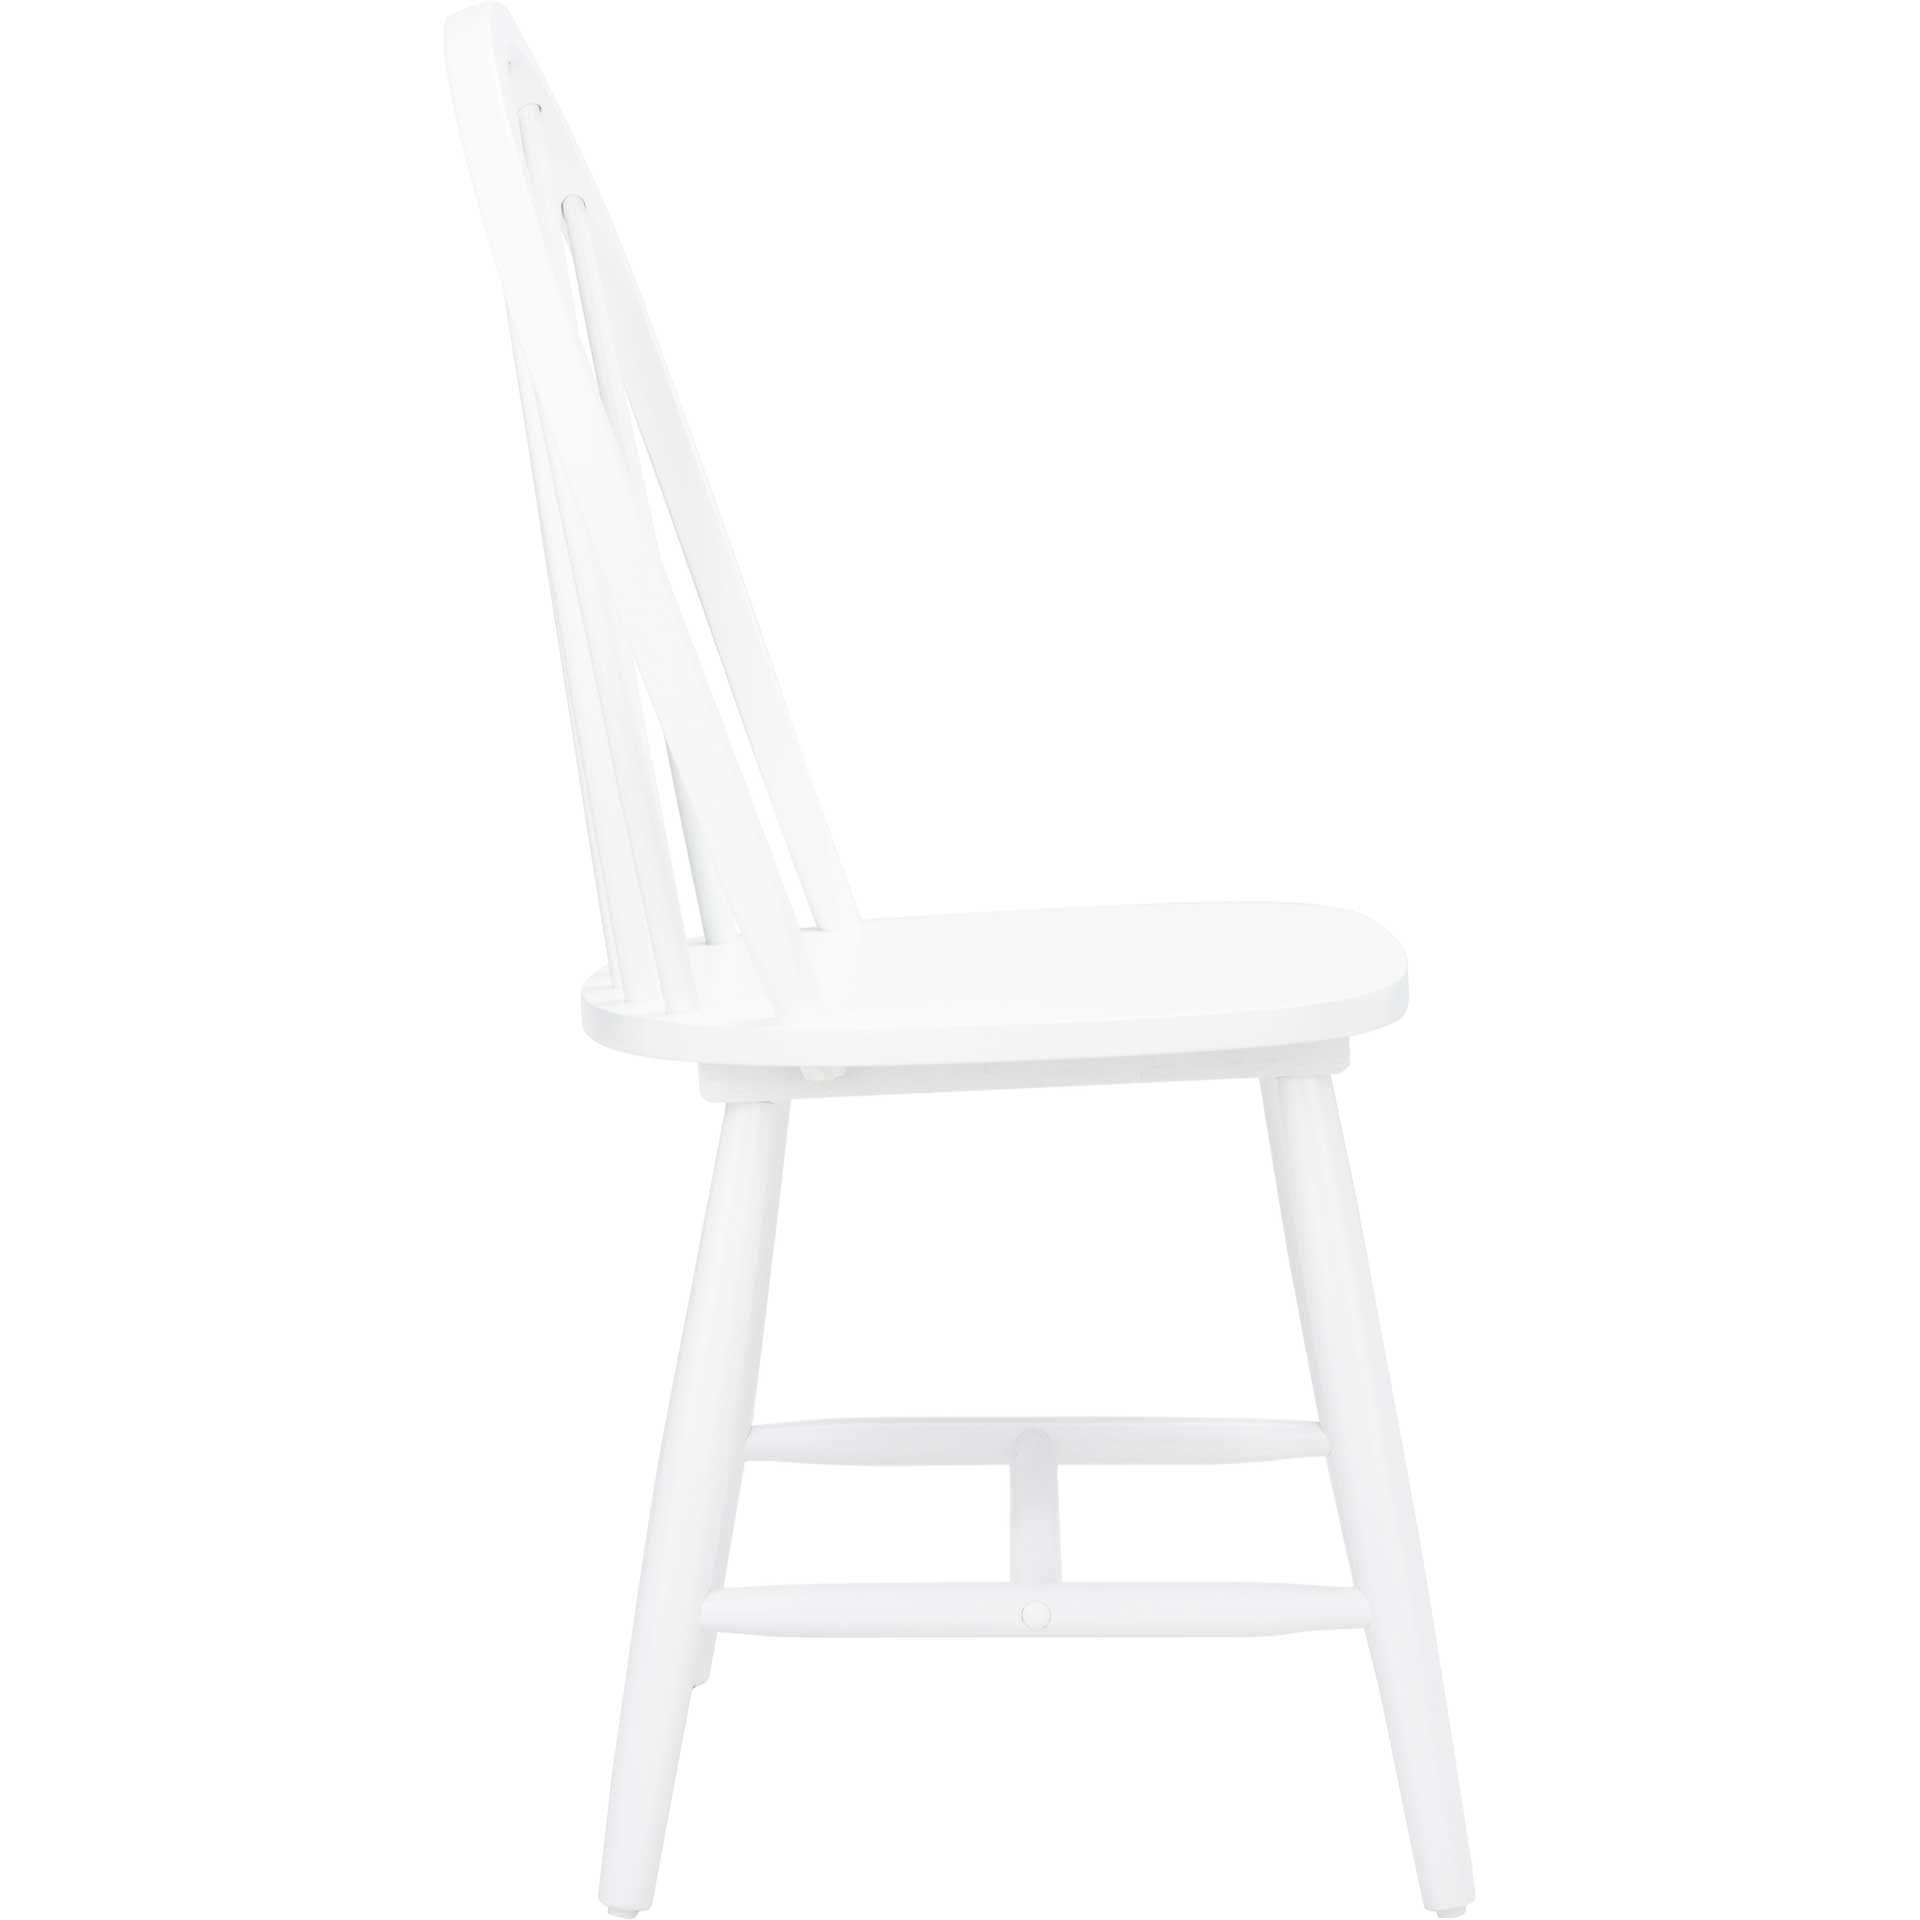 Calista Spindle Back Chair White (Set of 2)